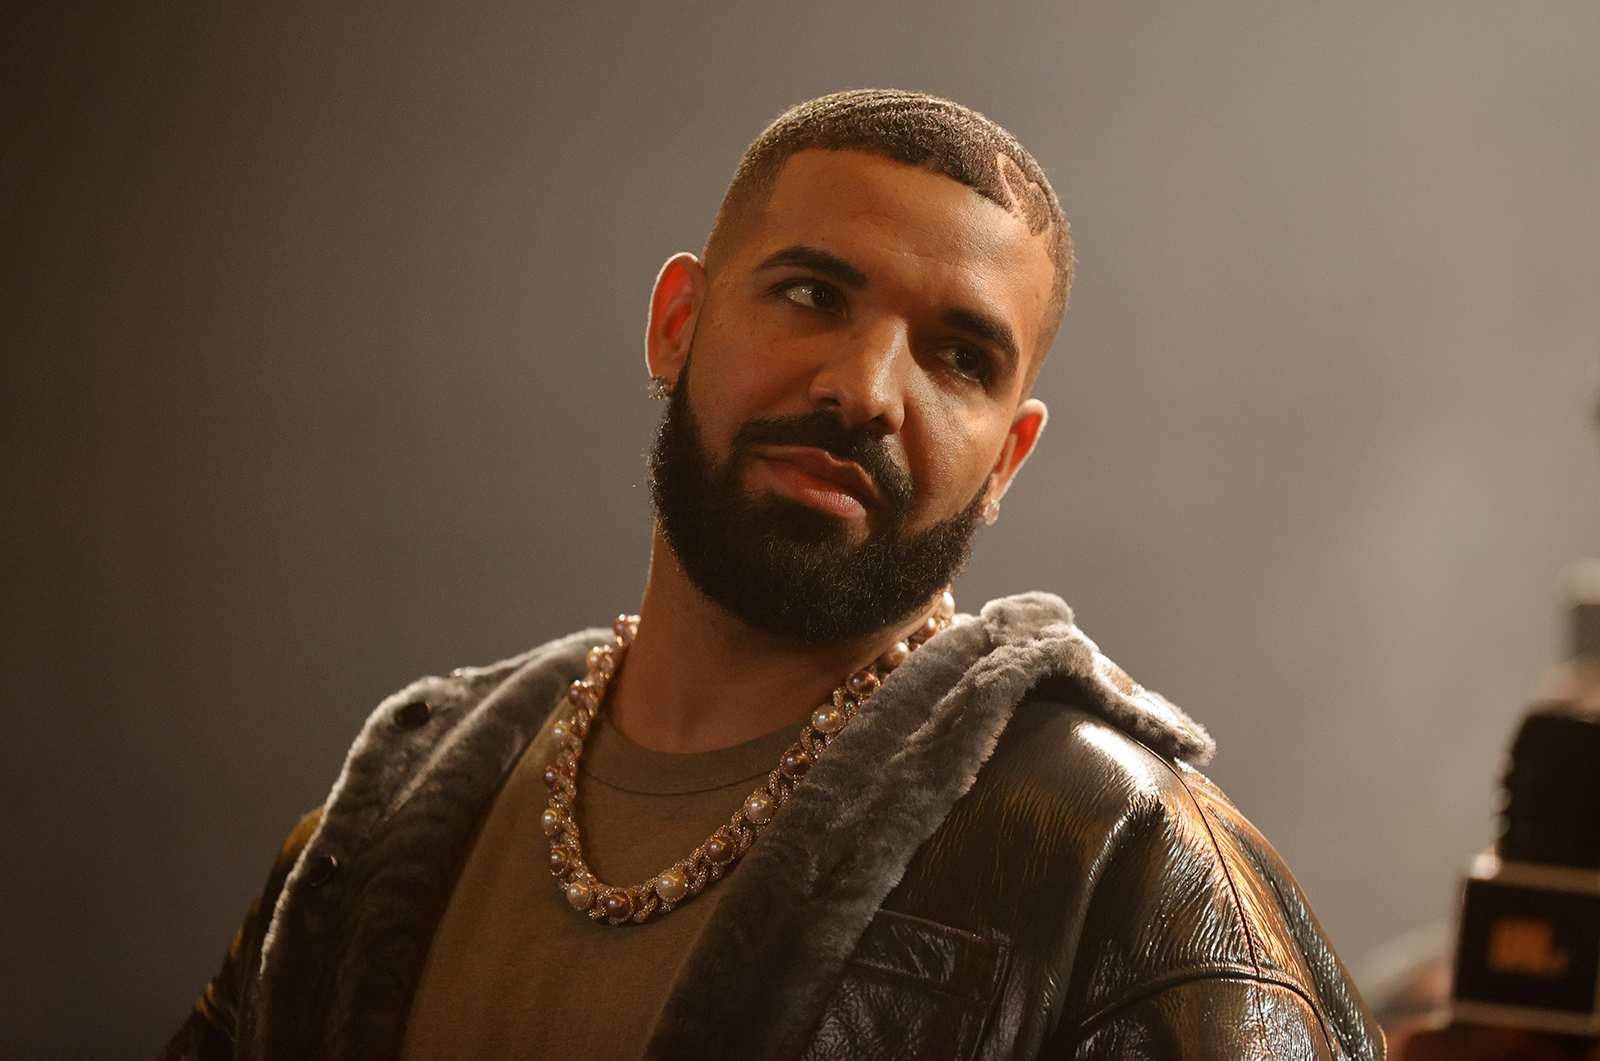 Drake says he’s taking a break from making music due to the ‘craziest’ health issues with his stomach